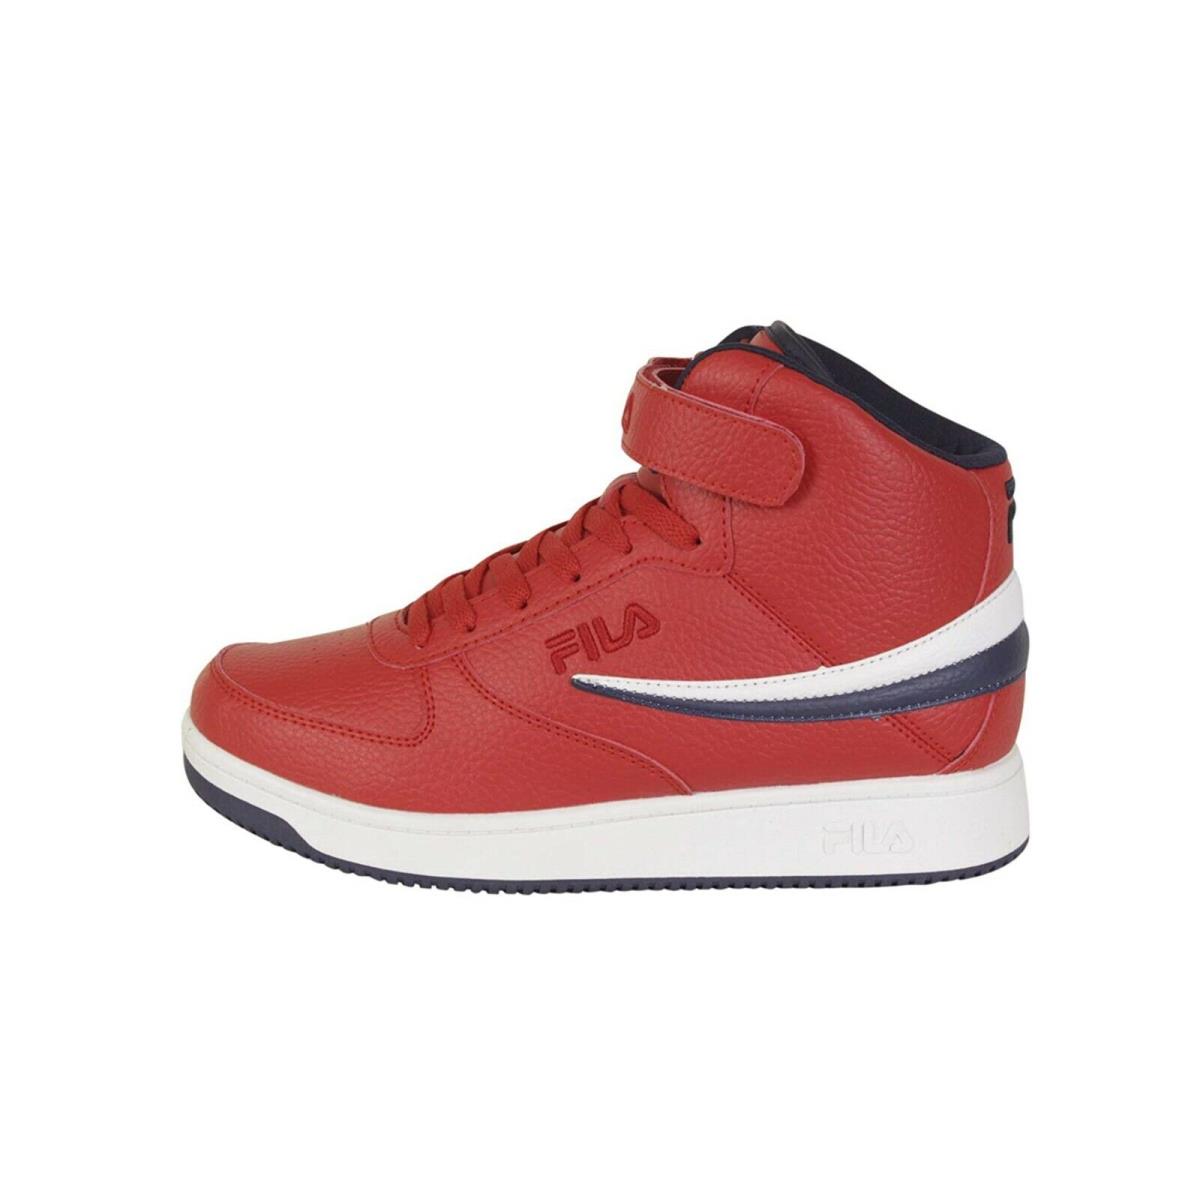 Fila Men A-high Shoes Synthetic Leather Red White High Top Sneakers